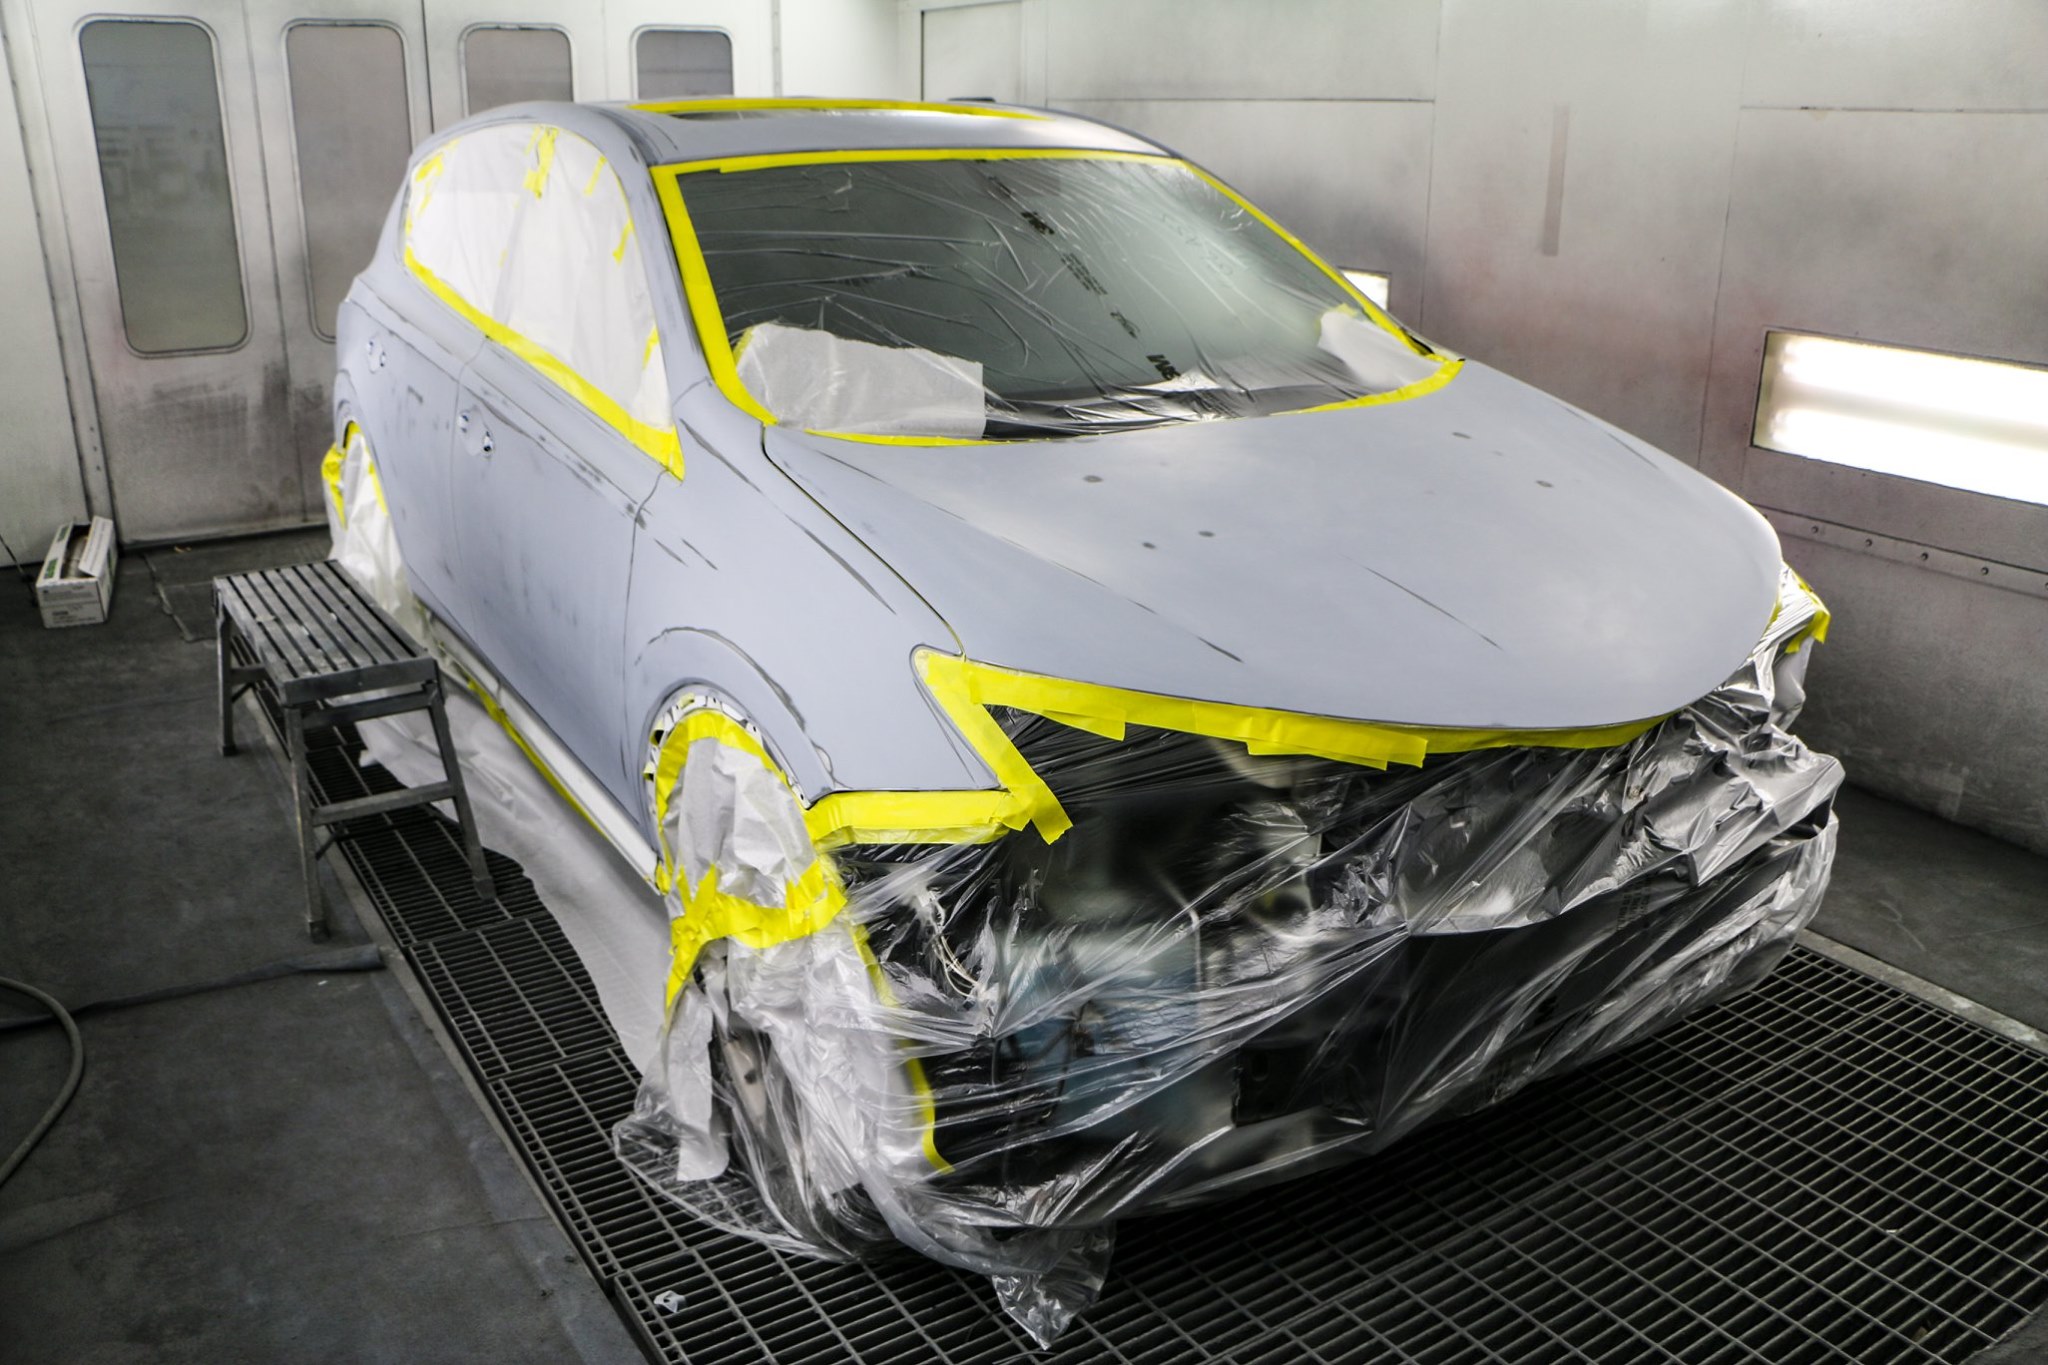 Car sanded, taped and ready for painting at Cool Springs Collision Center